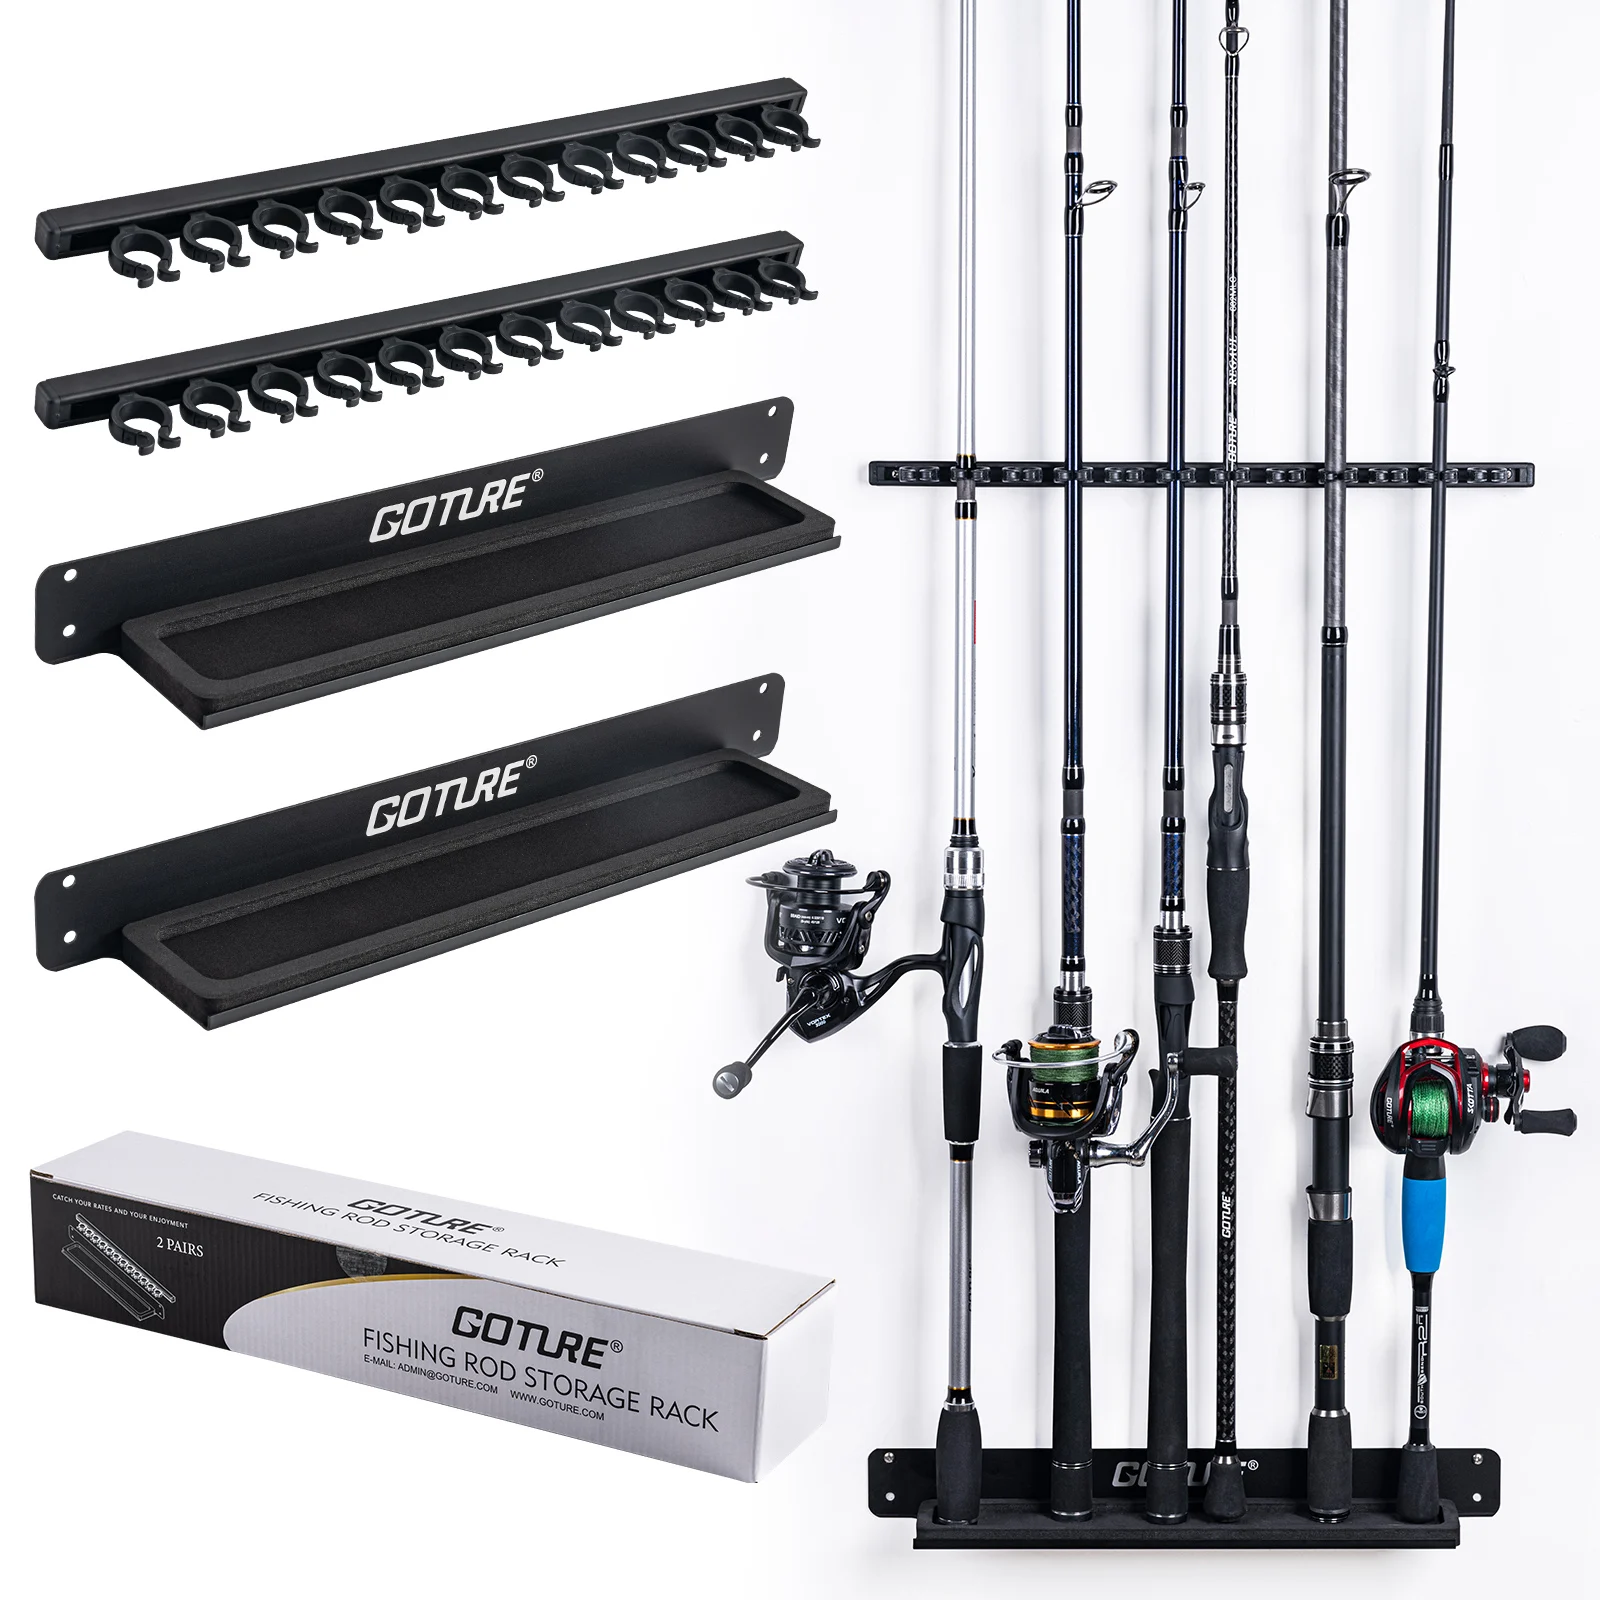 Goture 2 Pcs Fishing Rod Holder Stand Kit 12 Holes Black Silver Vertical  Wall Mount Rack fishing Rod Tackle Storage